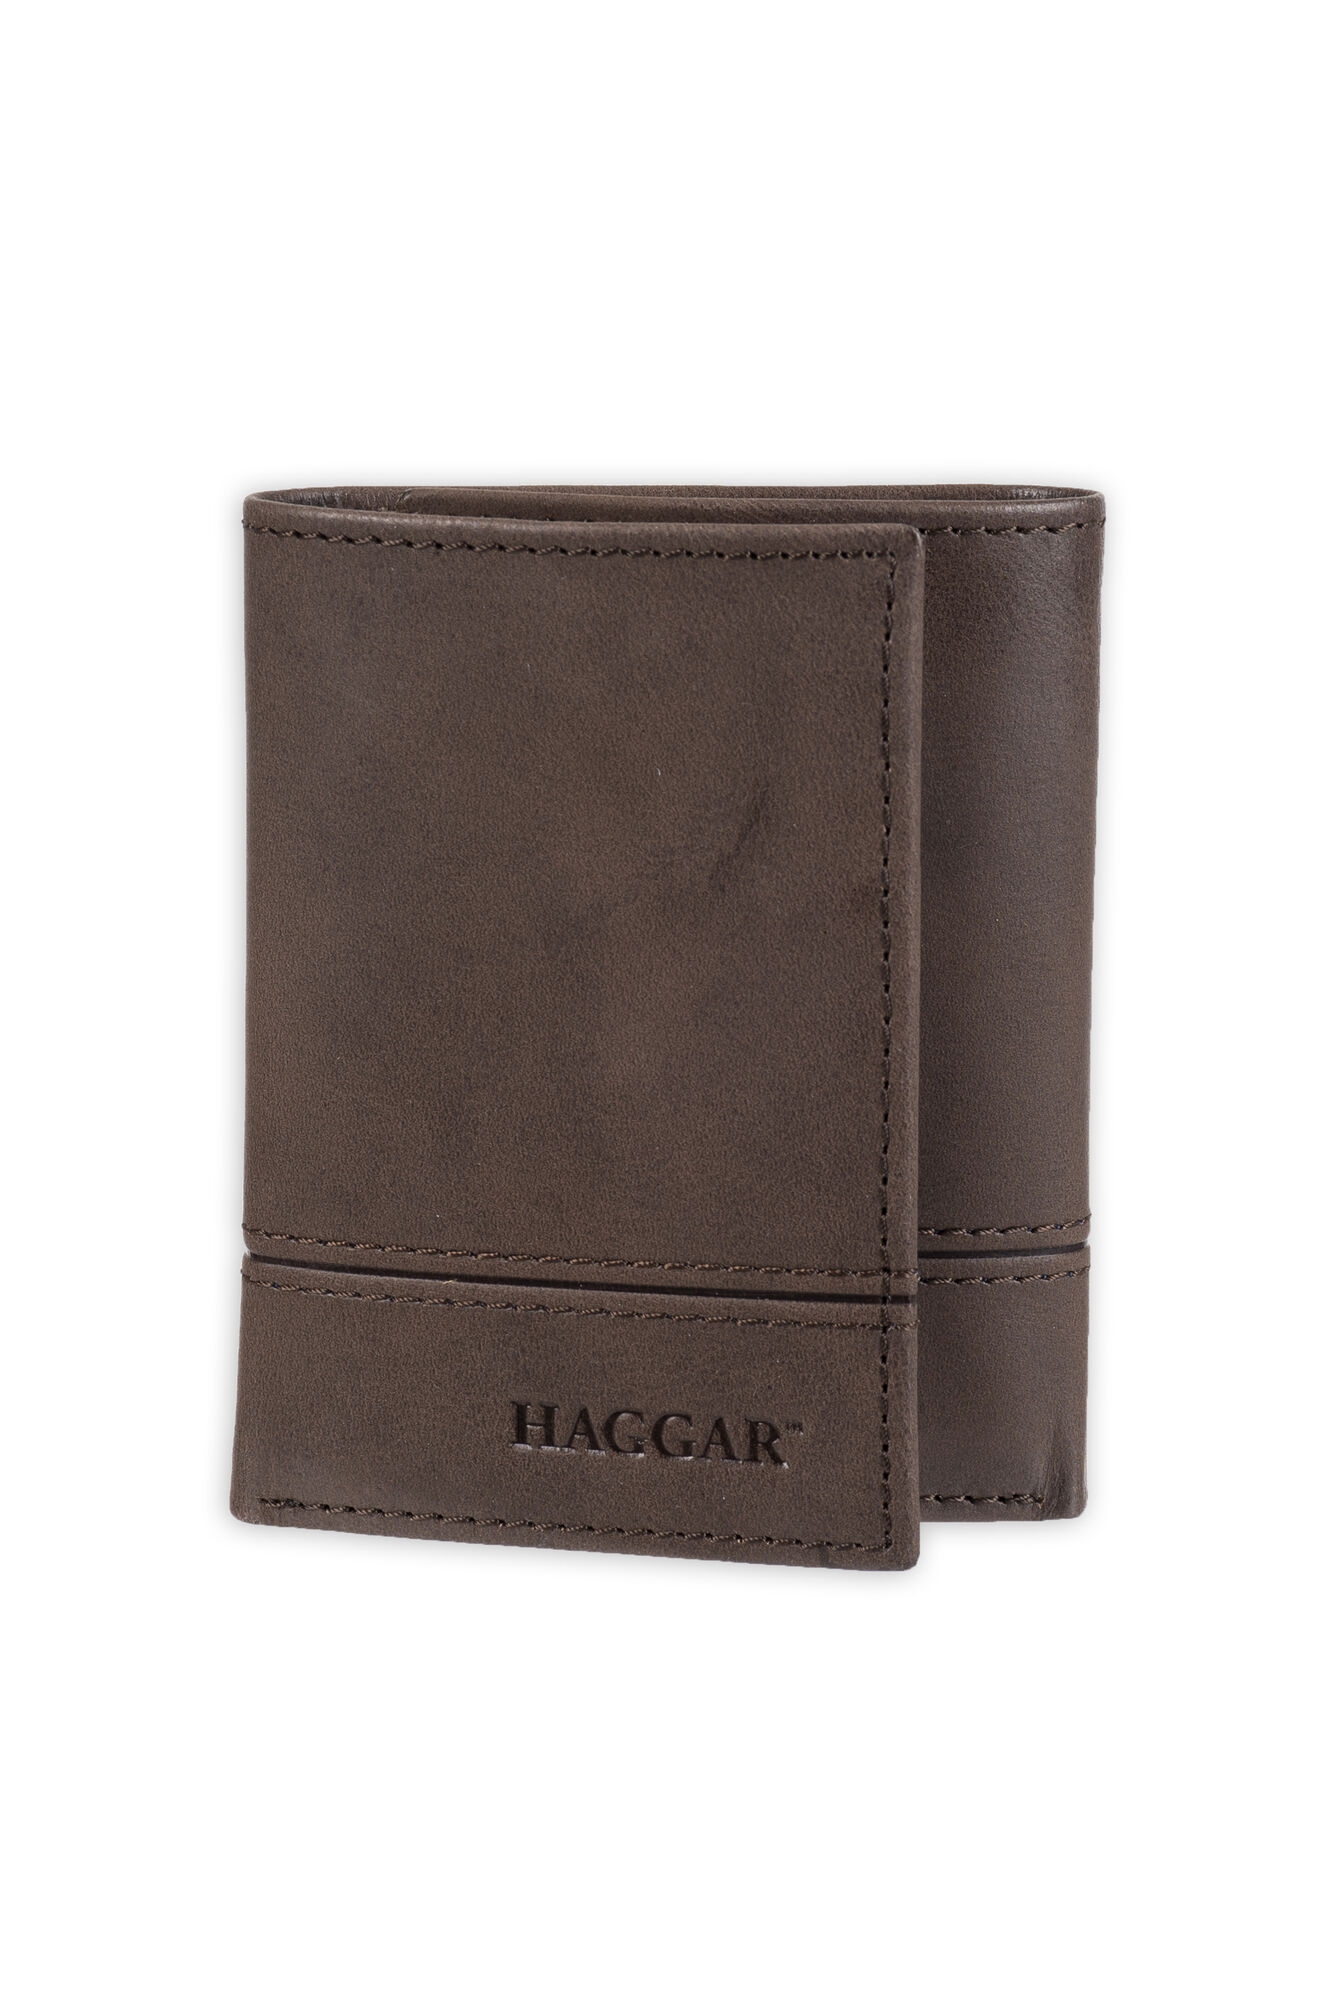 Haggar Rfid Carizzo Trifold Wallet Brown (31HH110002) photo